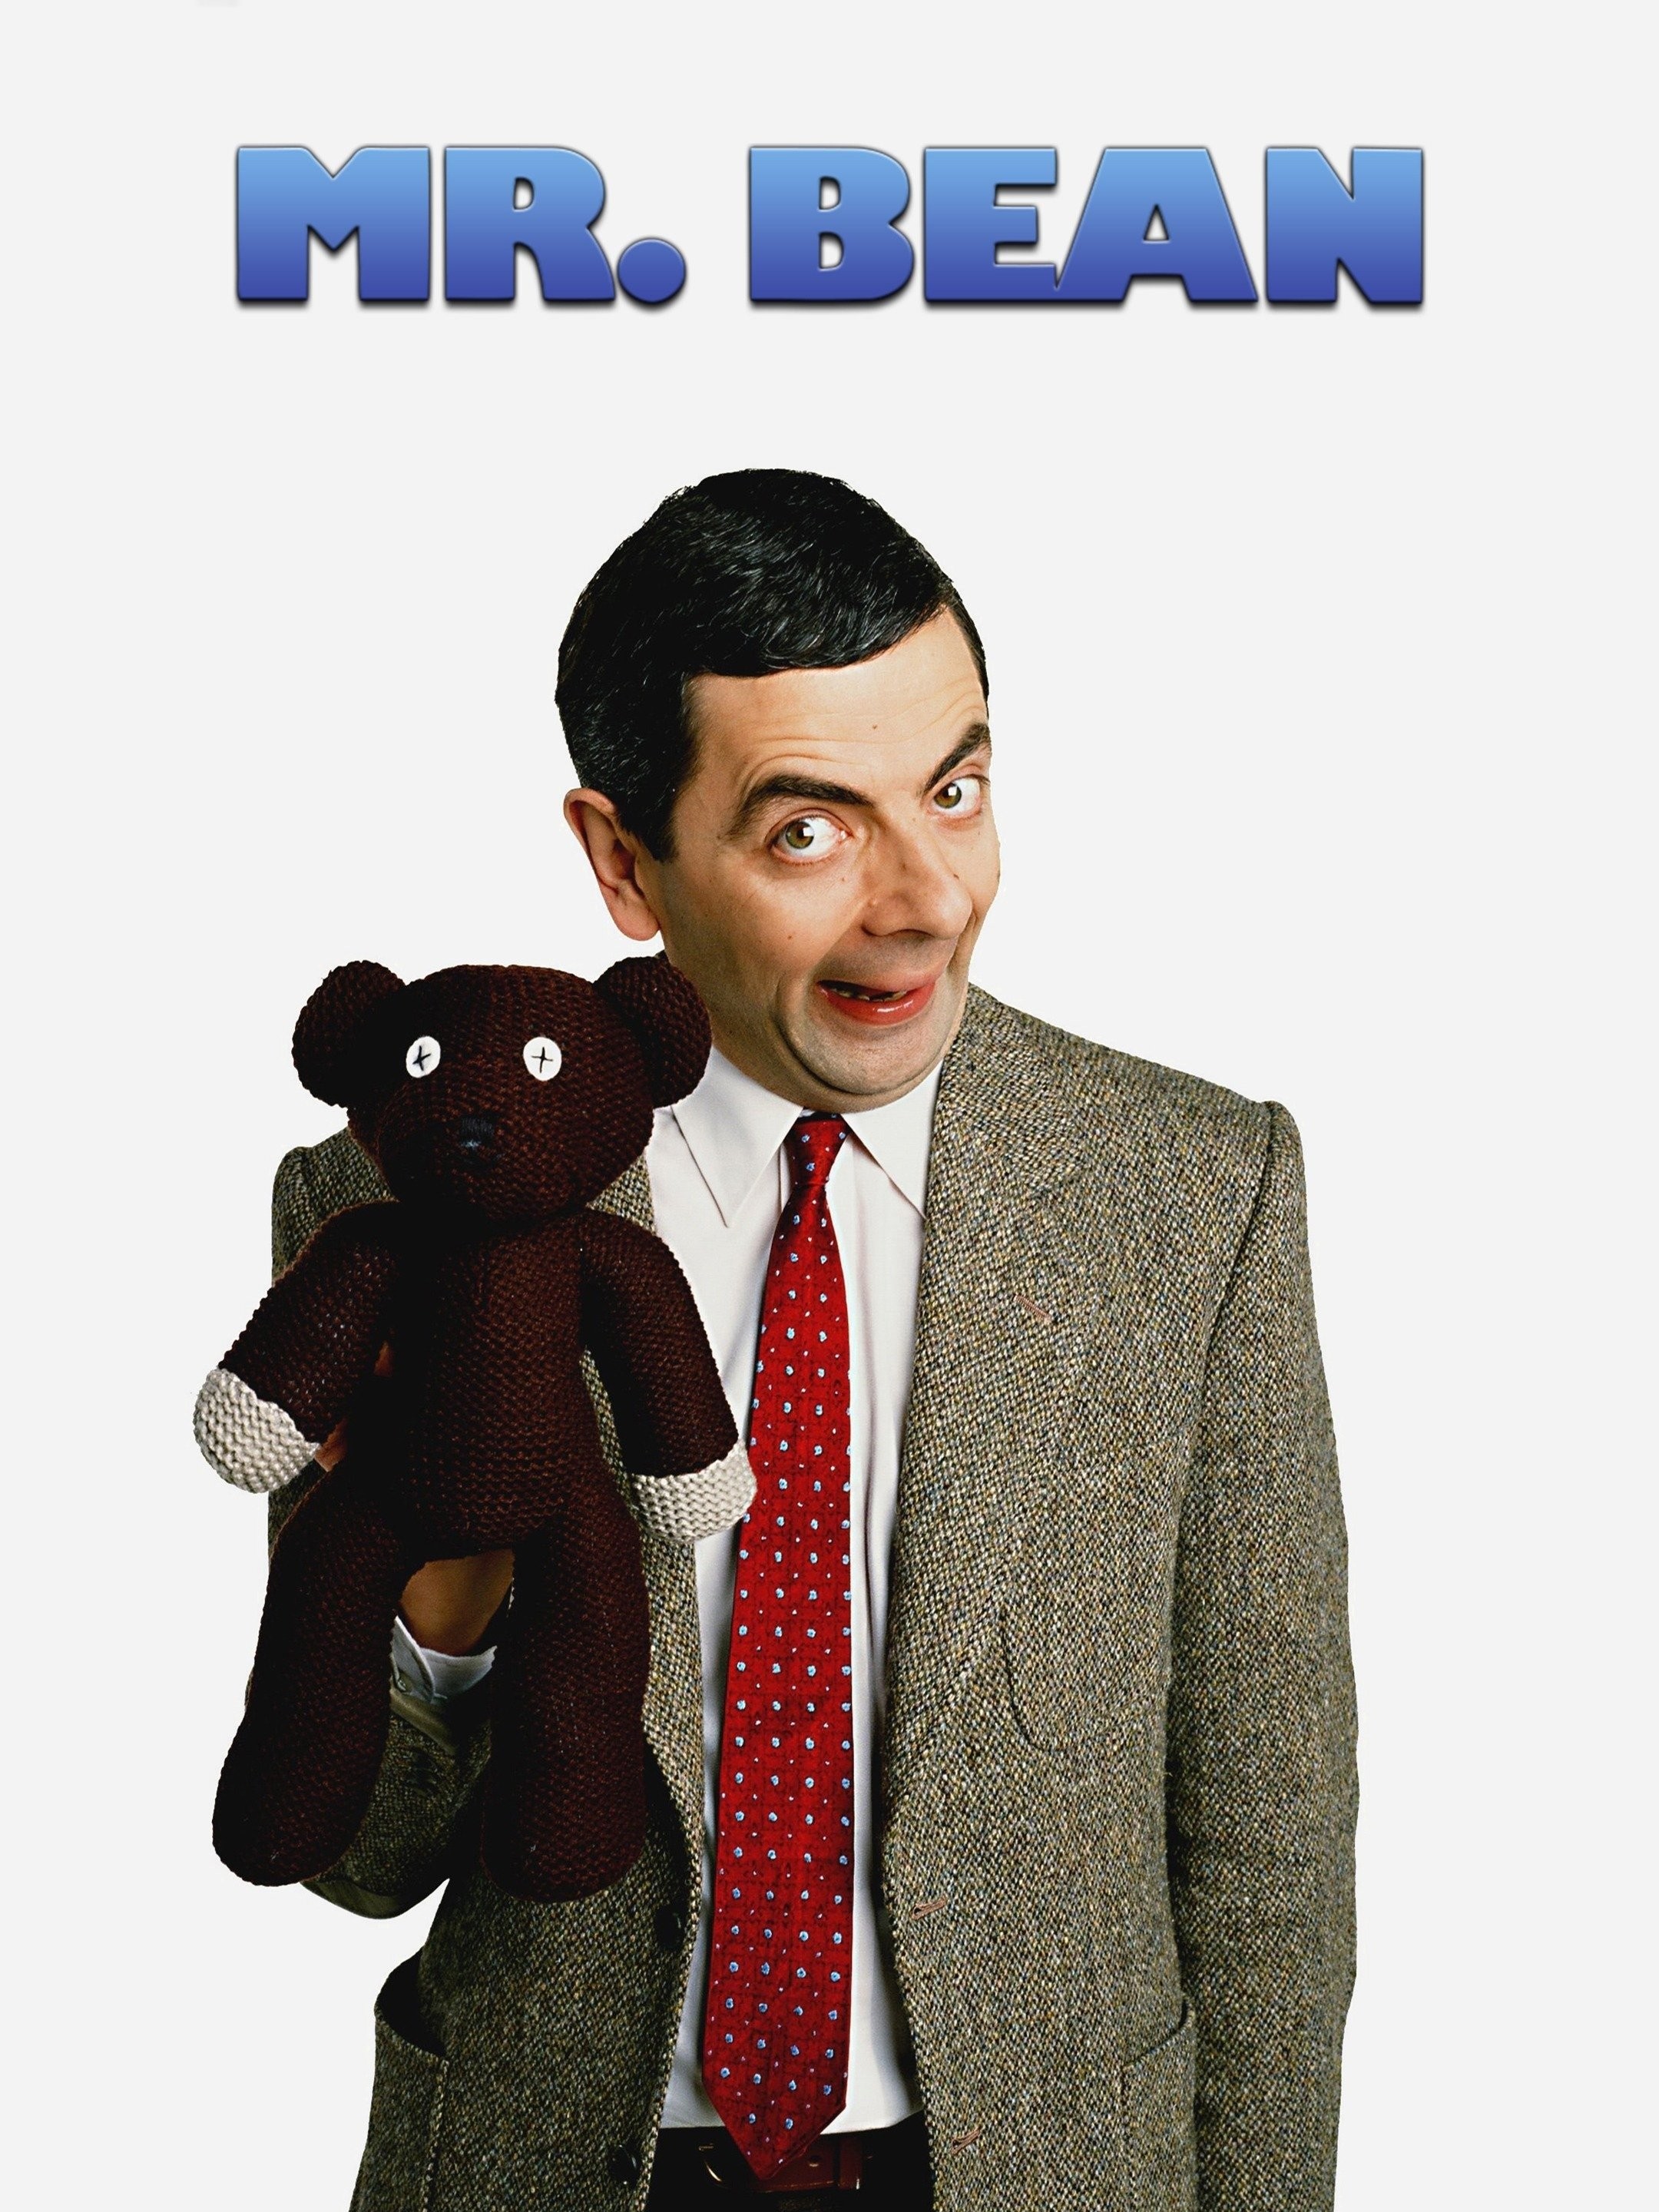 DVD REVIEW: BEST OF MR. BEAN, THE | CHUD.com